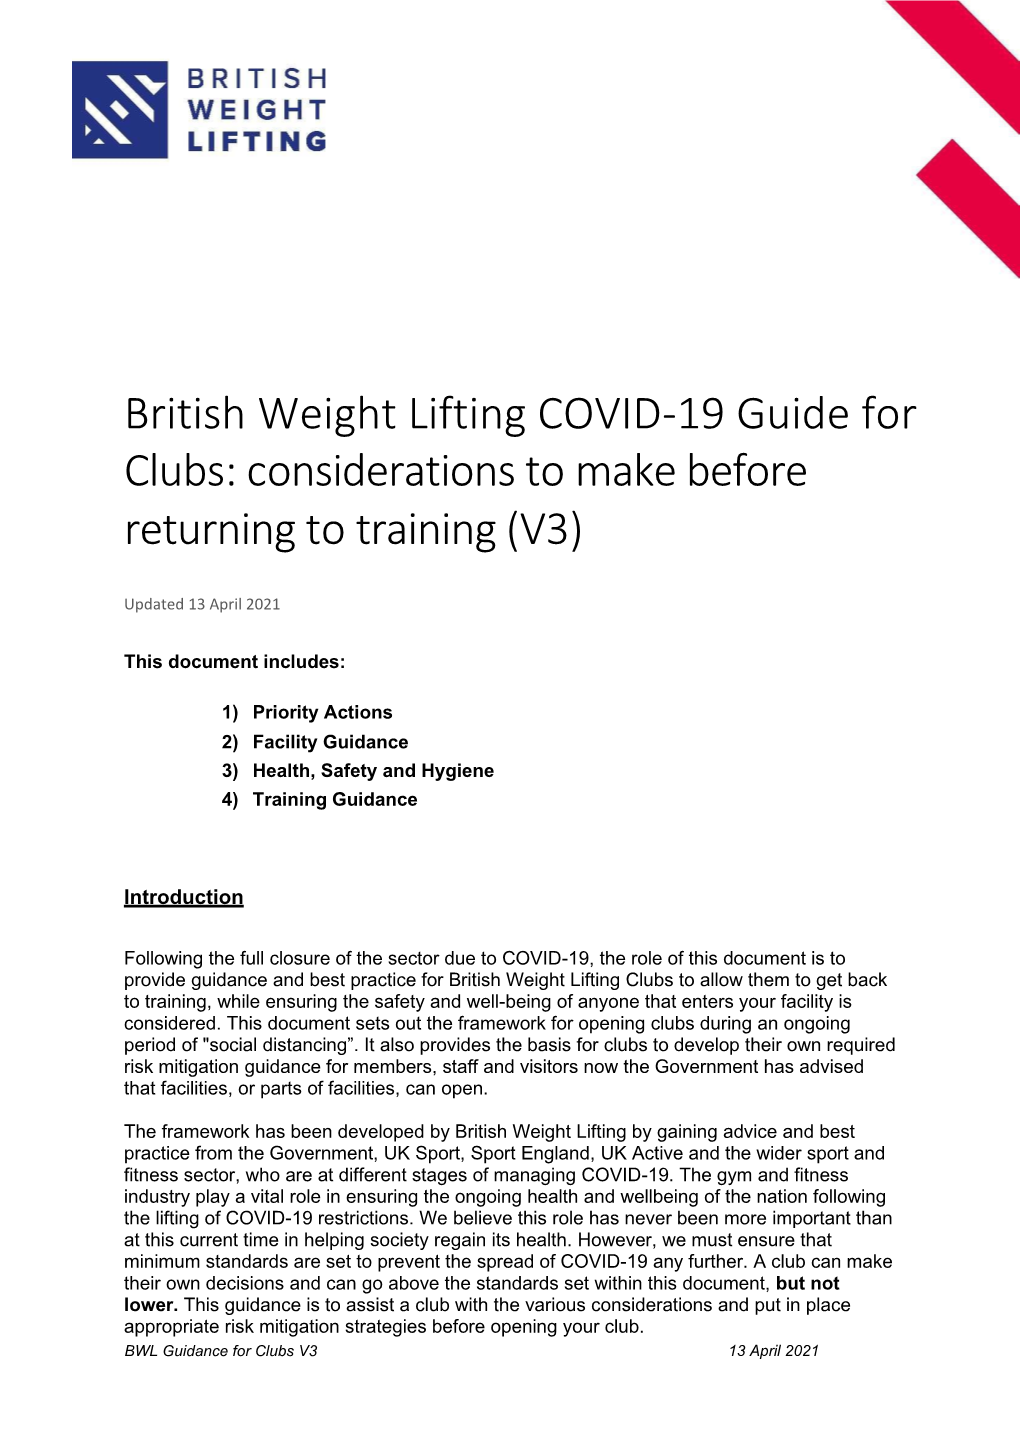 British Weight Lifting COVID-19 Guide for Clubs: Considerations to Make Before Returning to Training (V3)